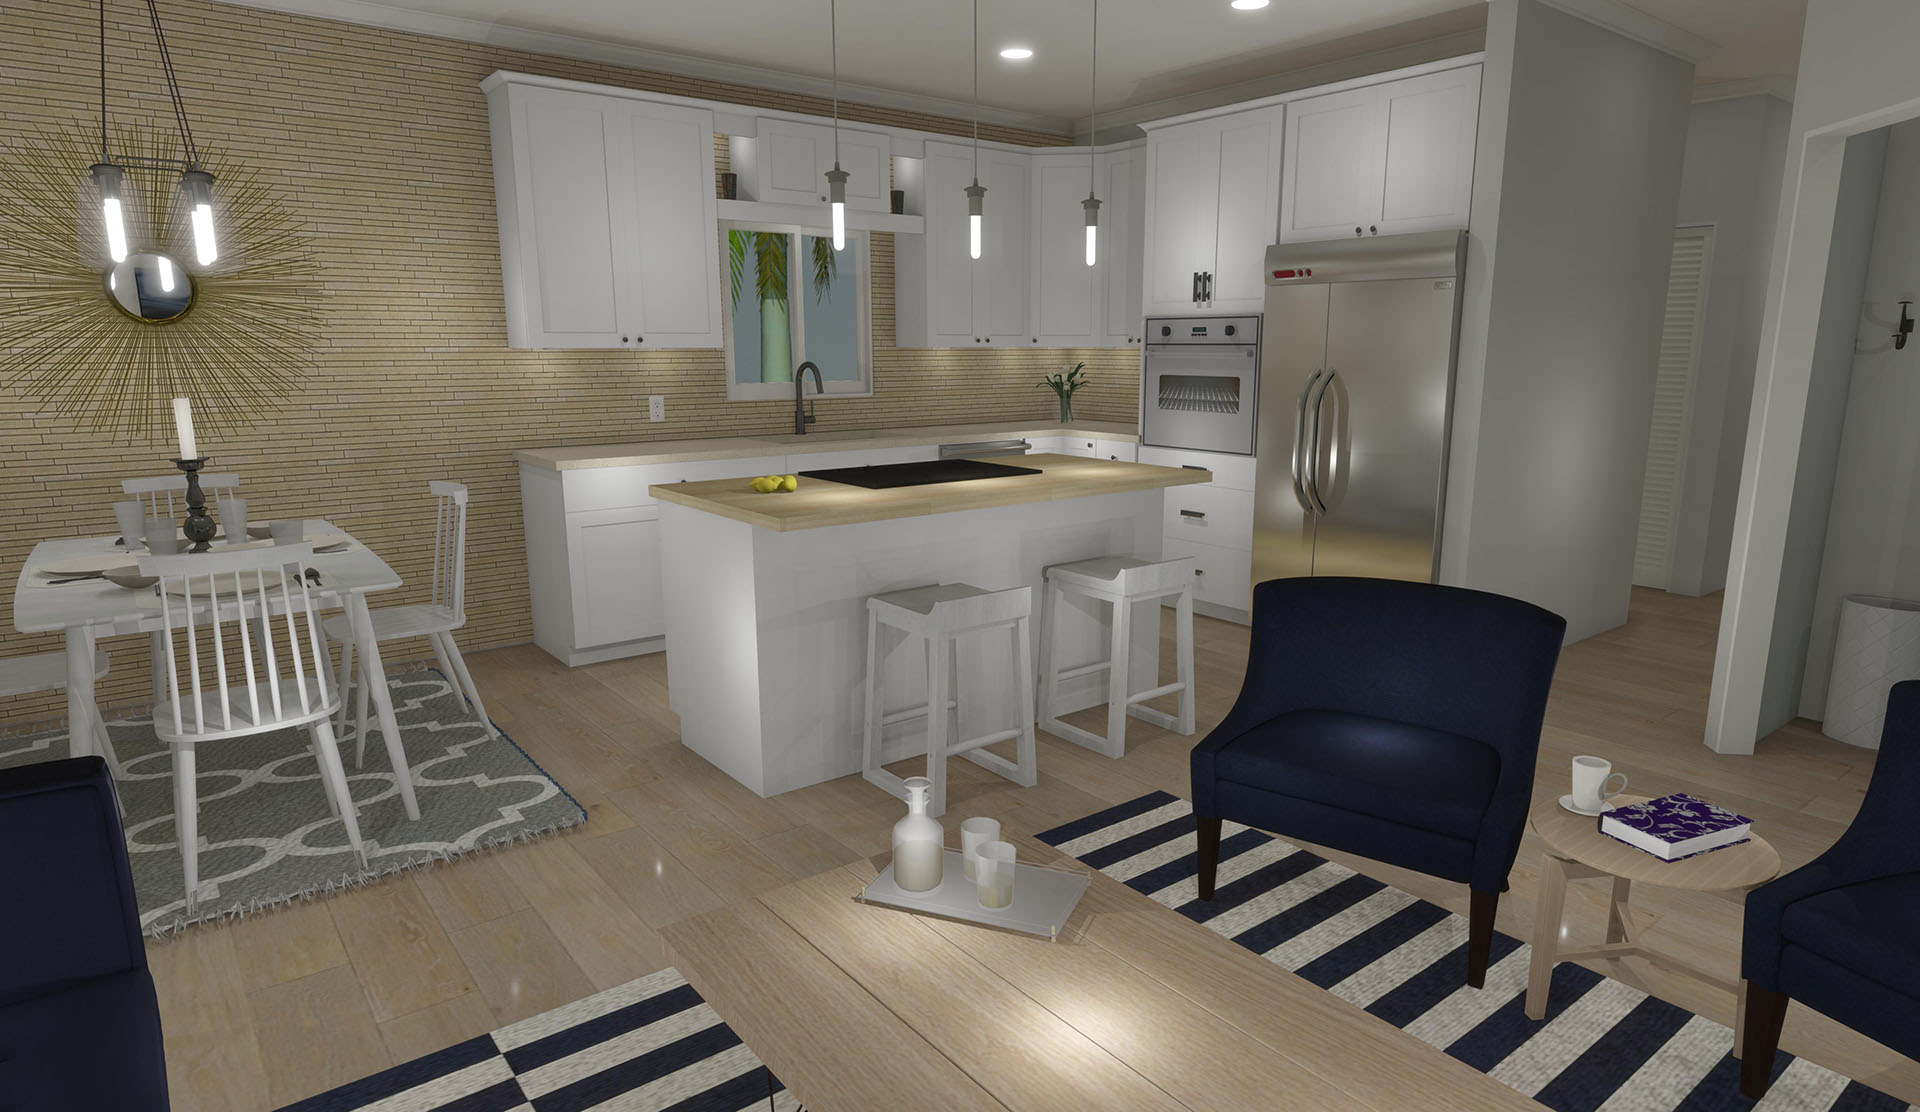 Kitchen area with a dining table and chairs